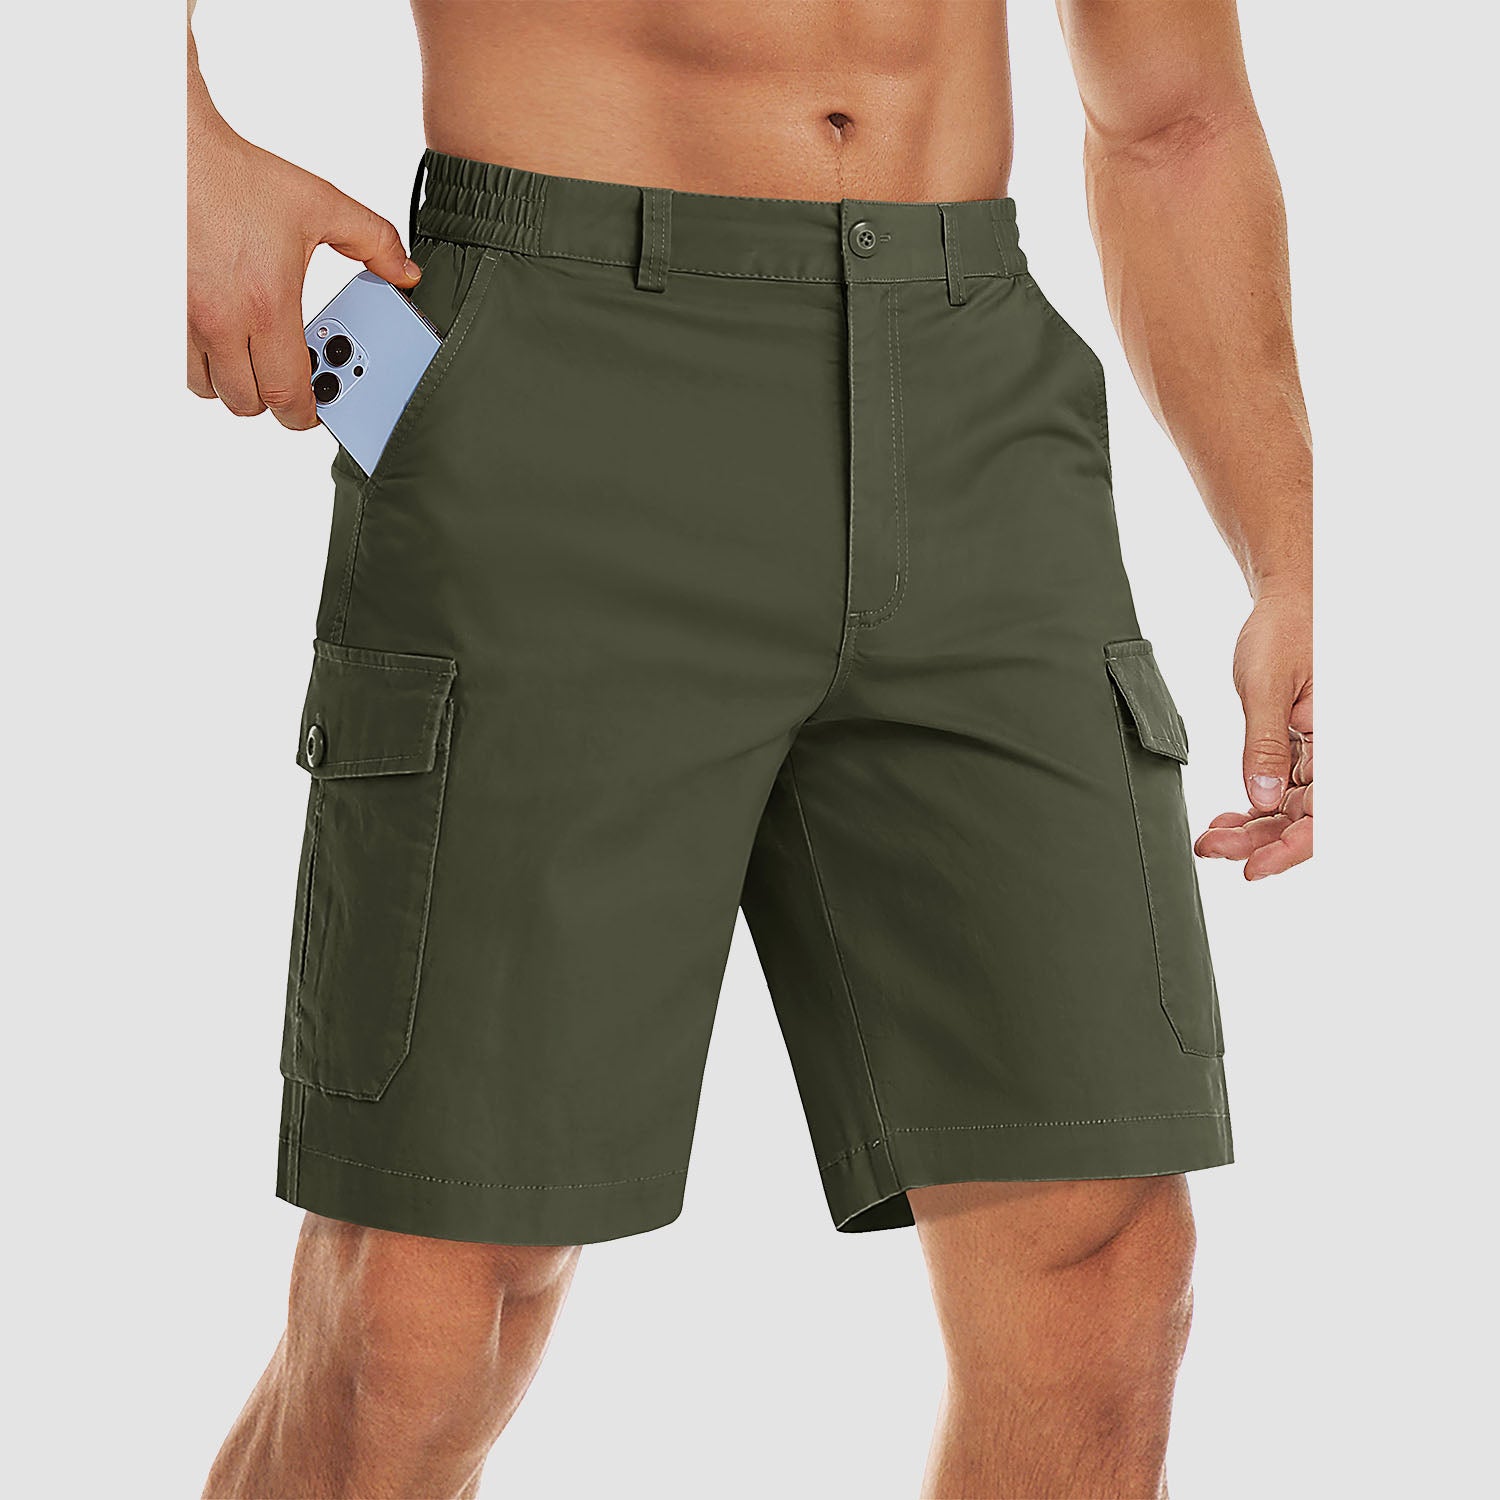 【Buy 4 Get the 4th Free!】Men's Cargo Shorts with Multi Pockets for Work Elastic Waist Casual Cotton Shorts